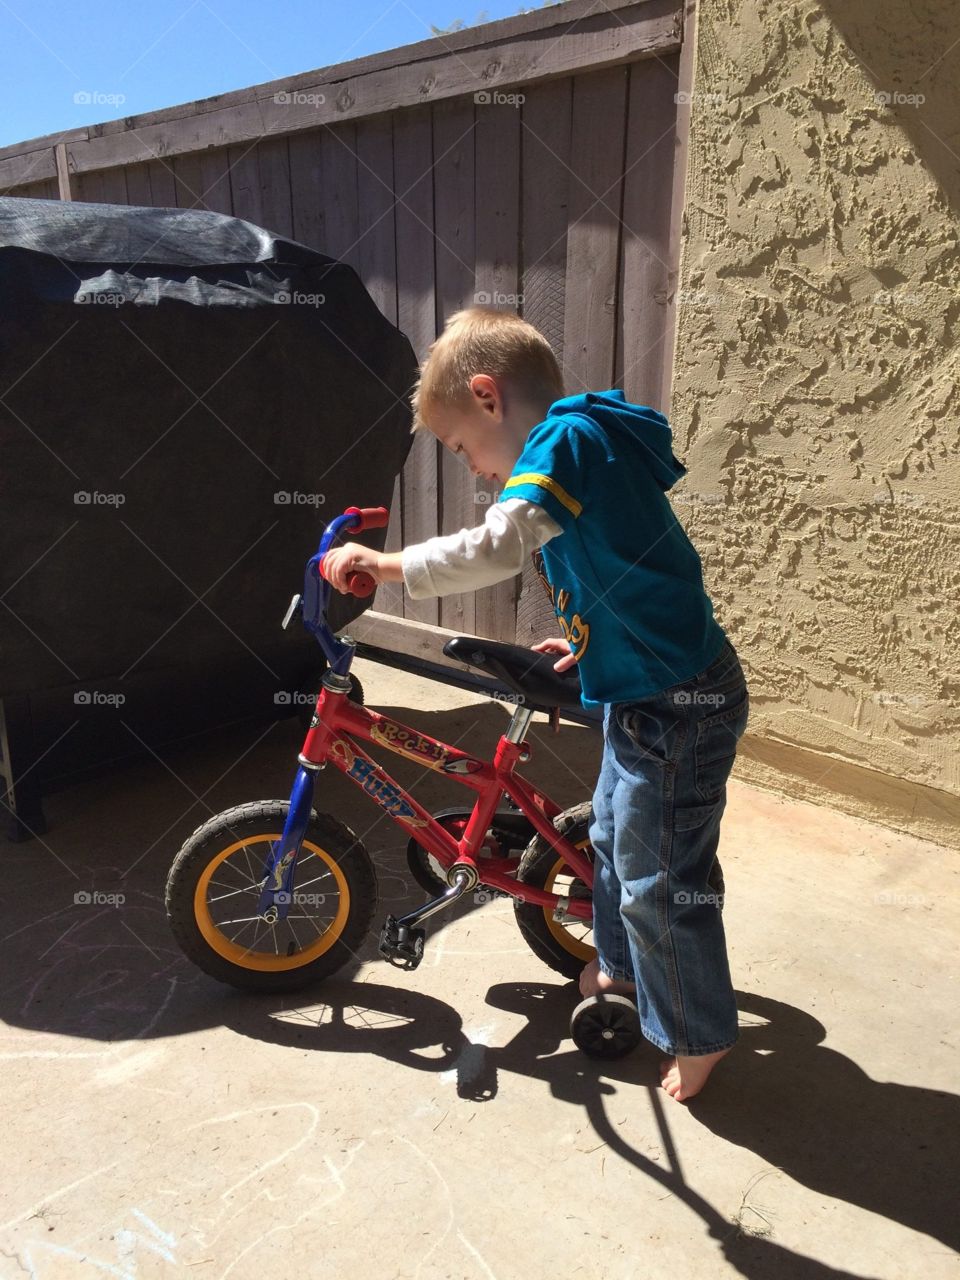 Learning to ride a bicycle 